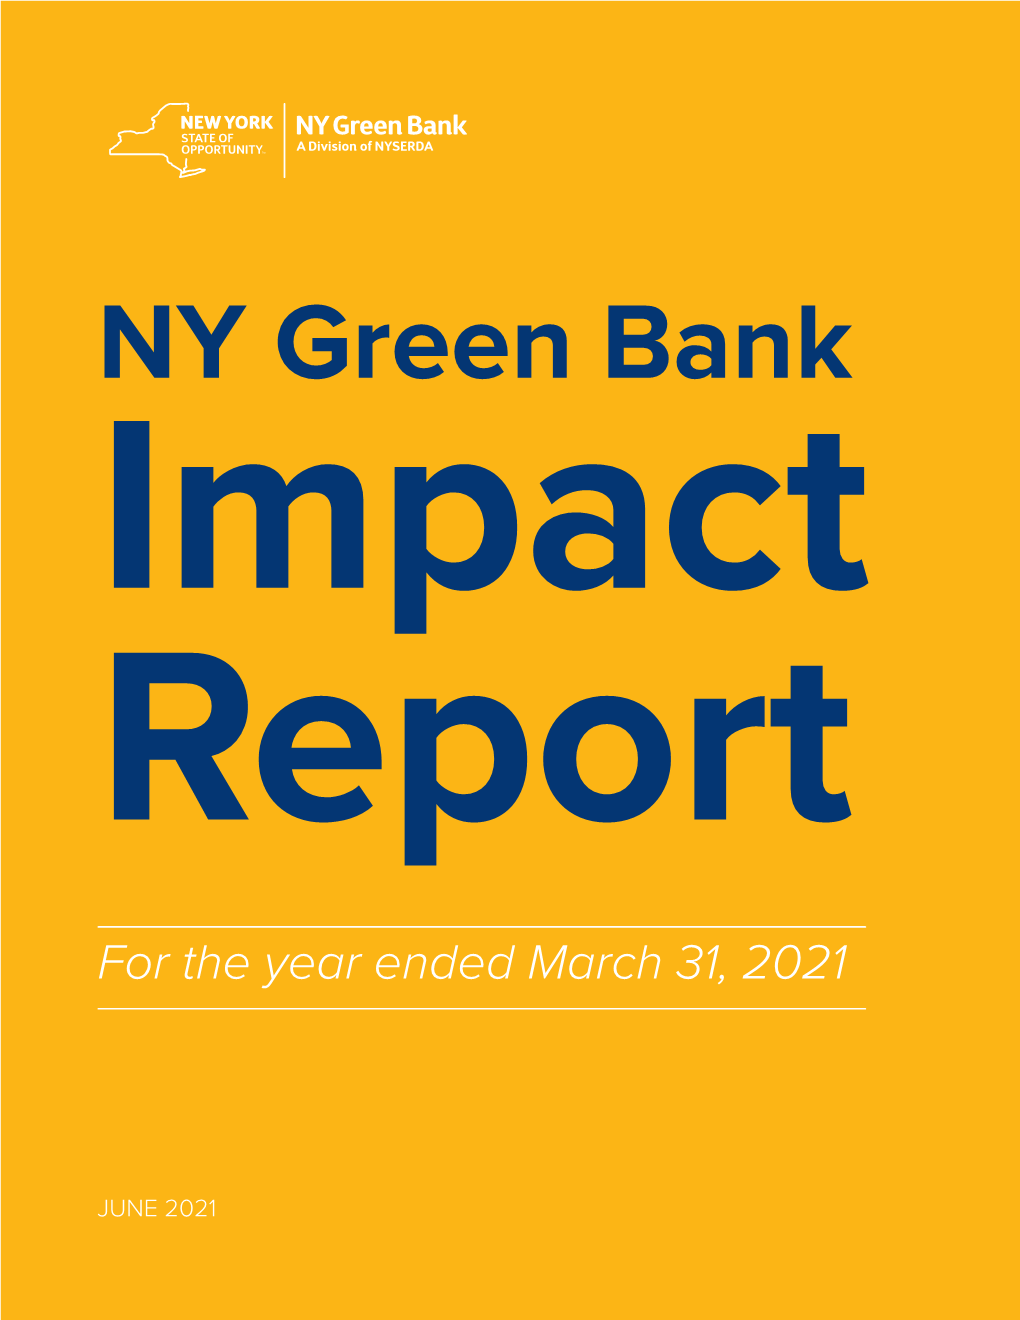 NY Green Bank Impact Report for the Year Ended March 31, 2021